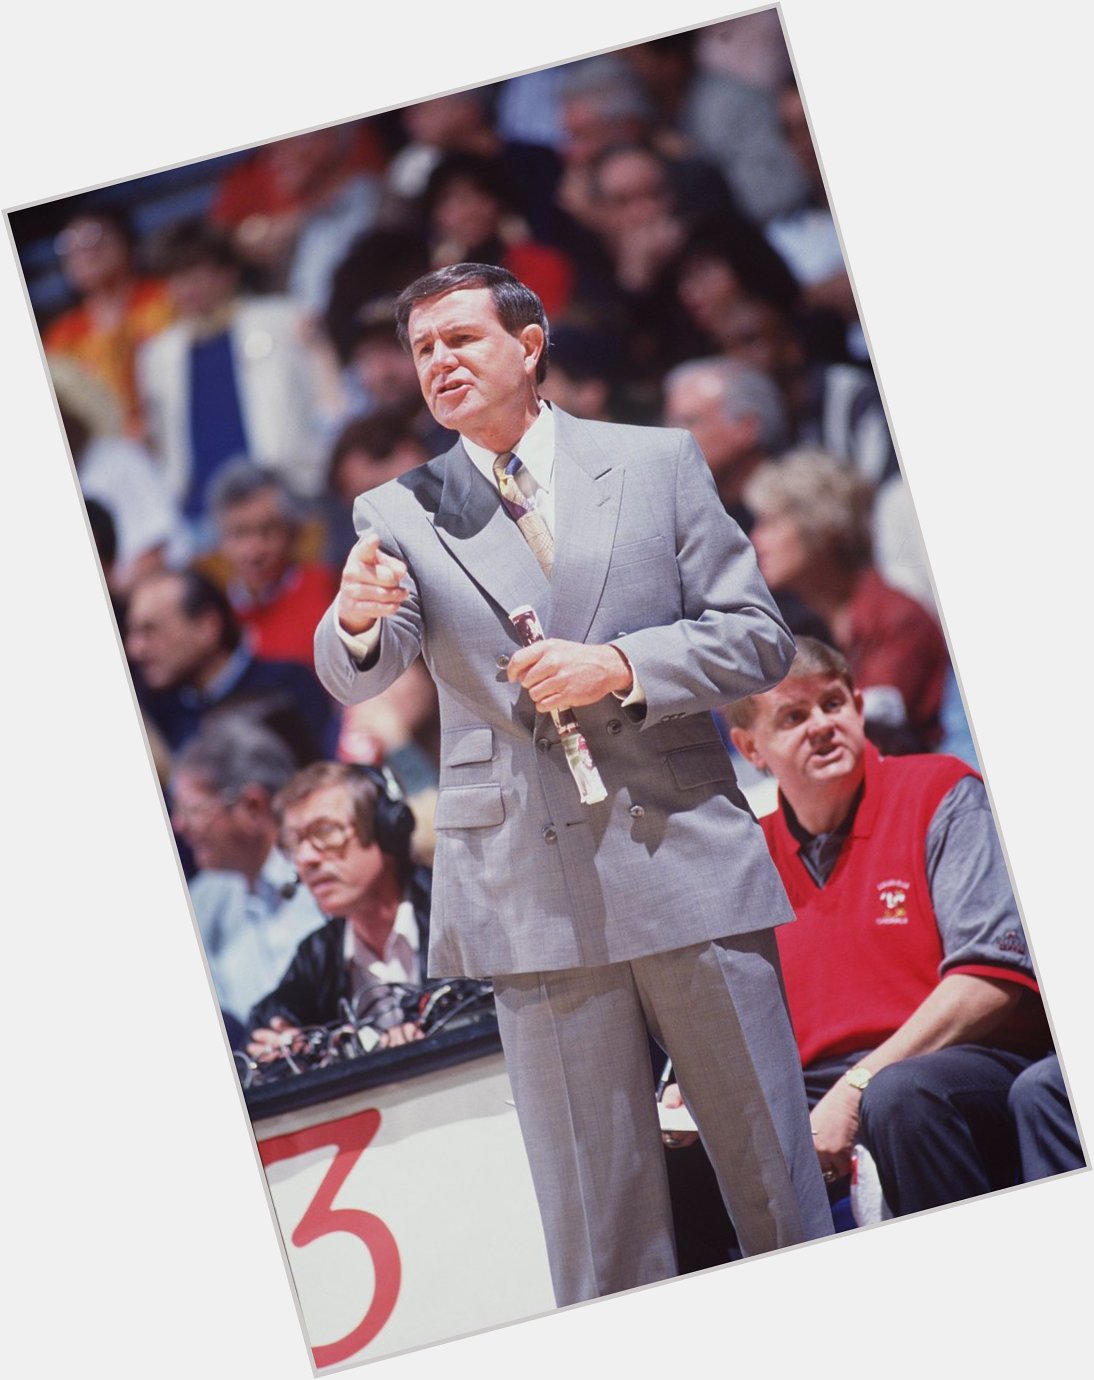 To wish Denny Crum a Happy Birthday.   : J.D. Cuban via Getty Images 